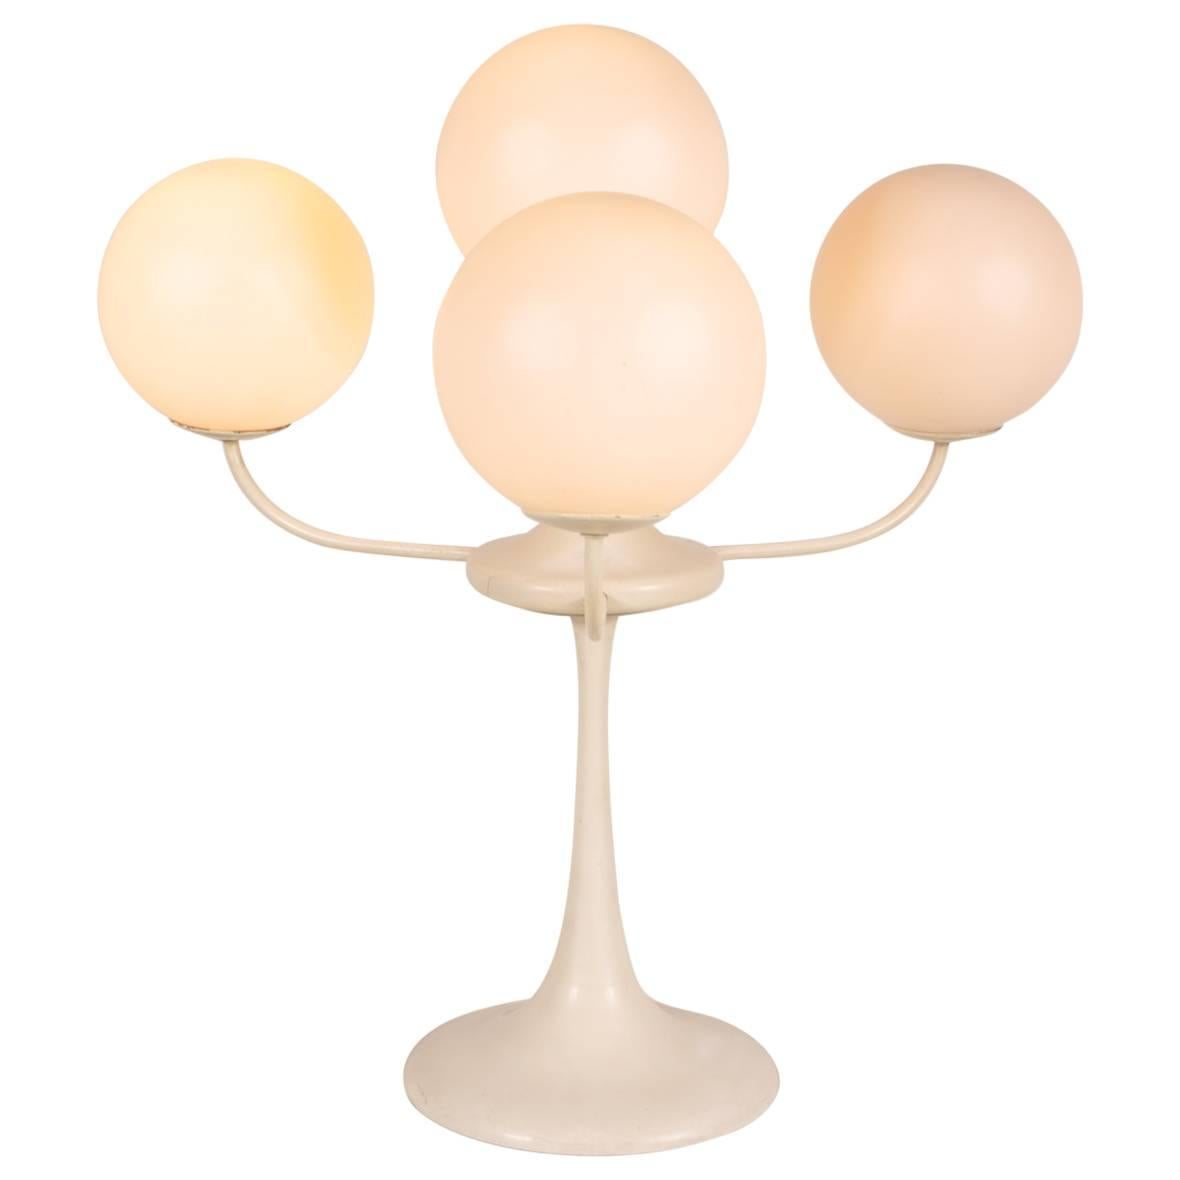 Early Edition Table Lamp by Max Bill, Switzerland, circa 1960